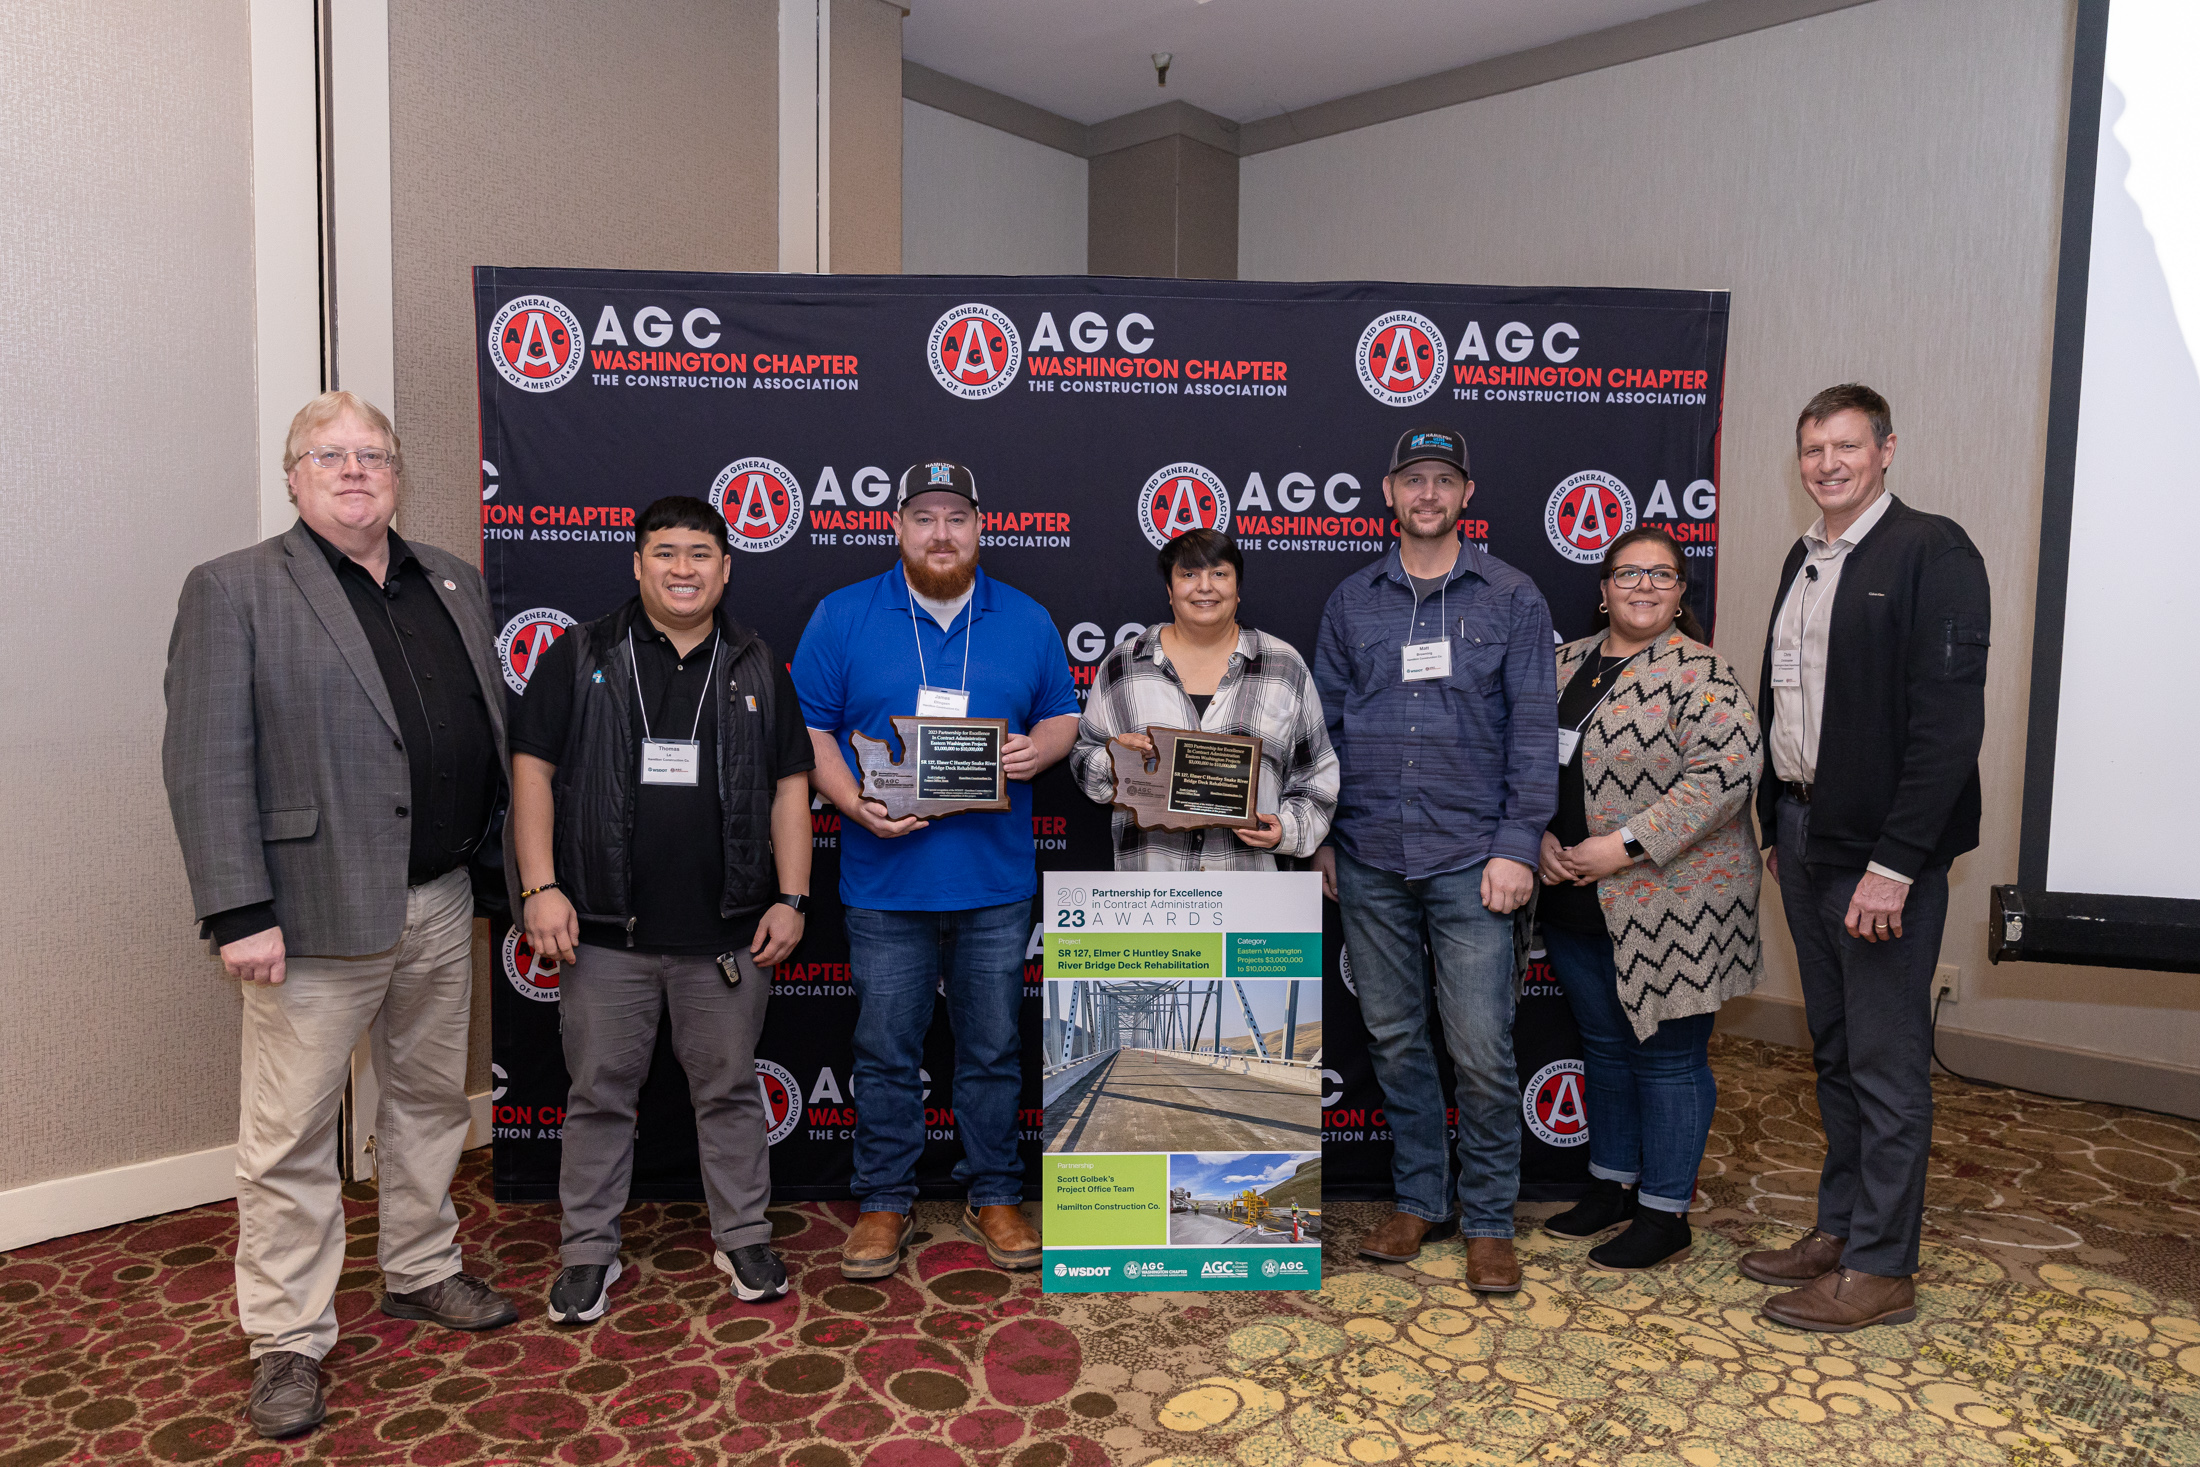 Seven people, two of whom are holding award plaques, standing in front of an AGC Washington Chapter backdrop.